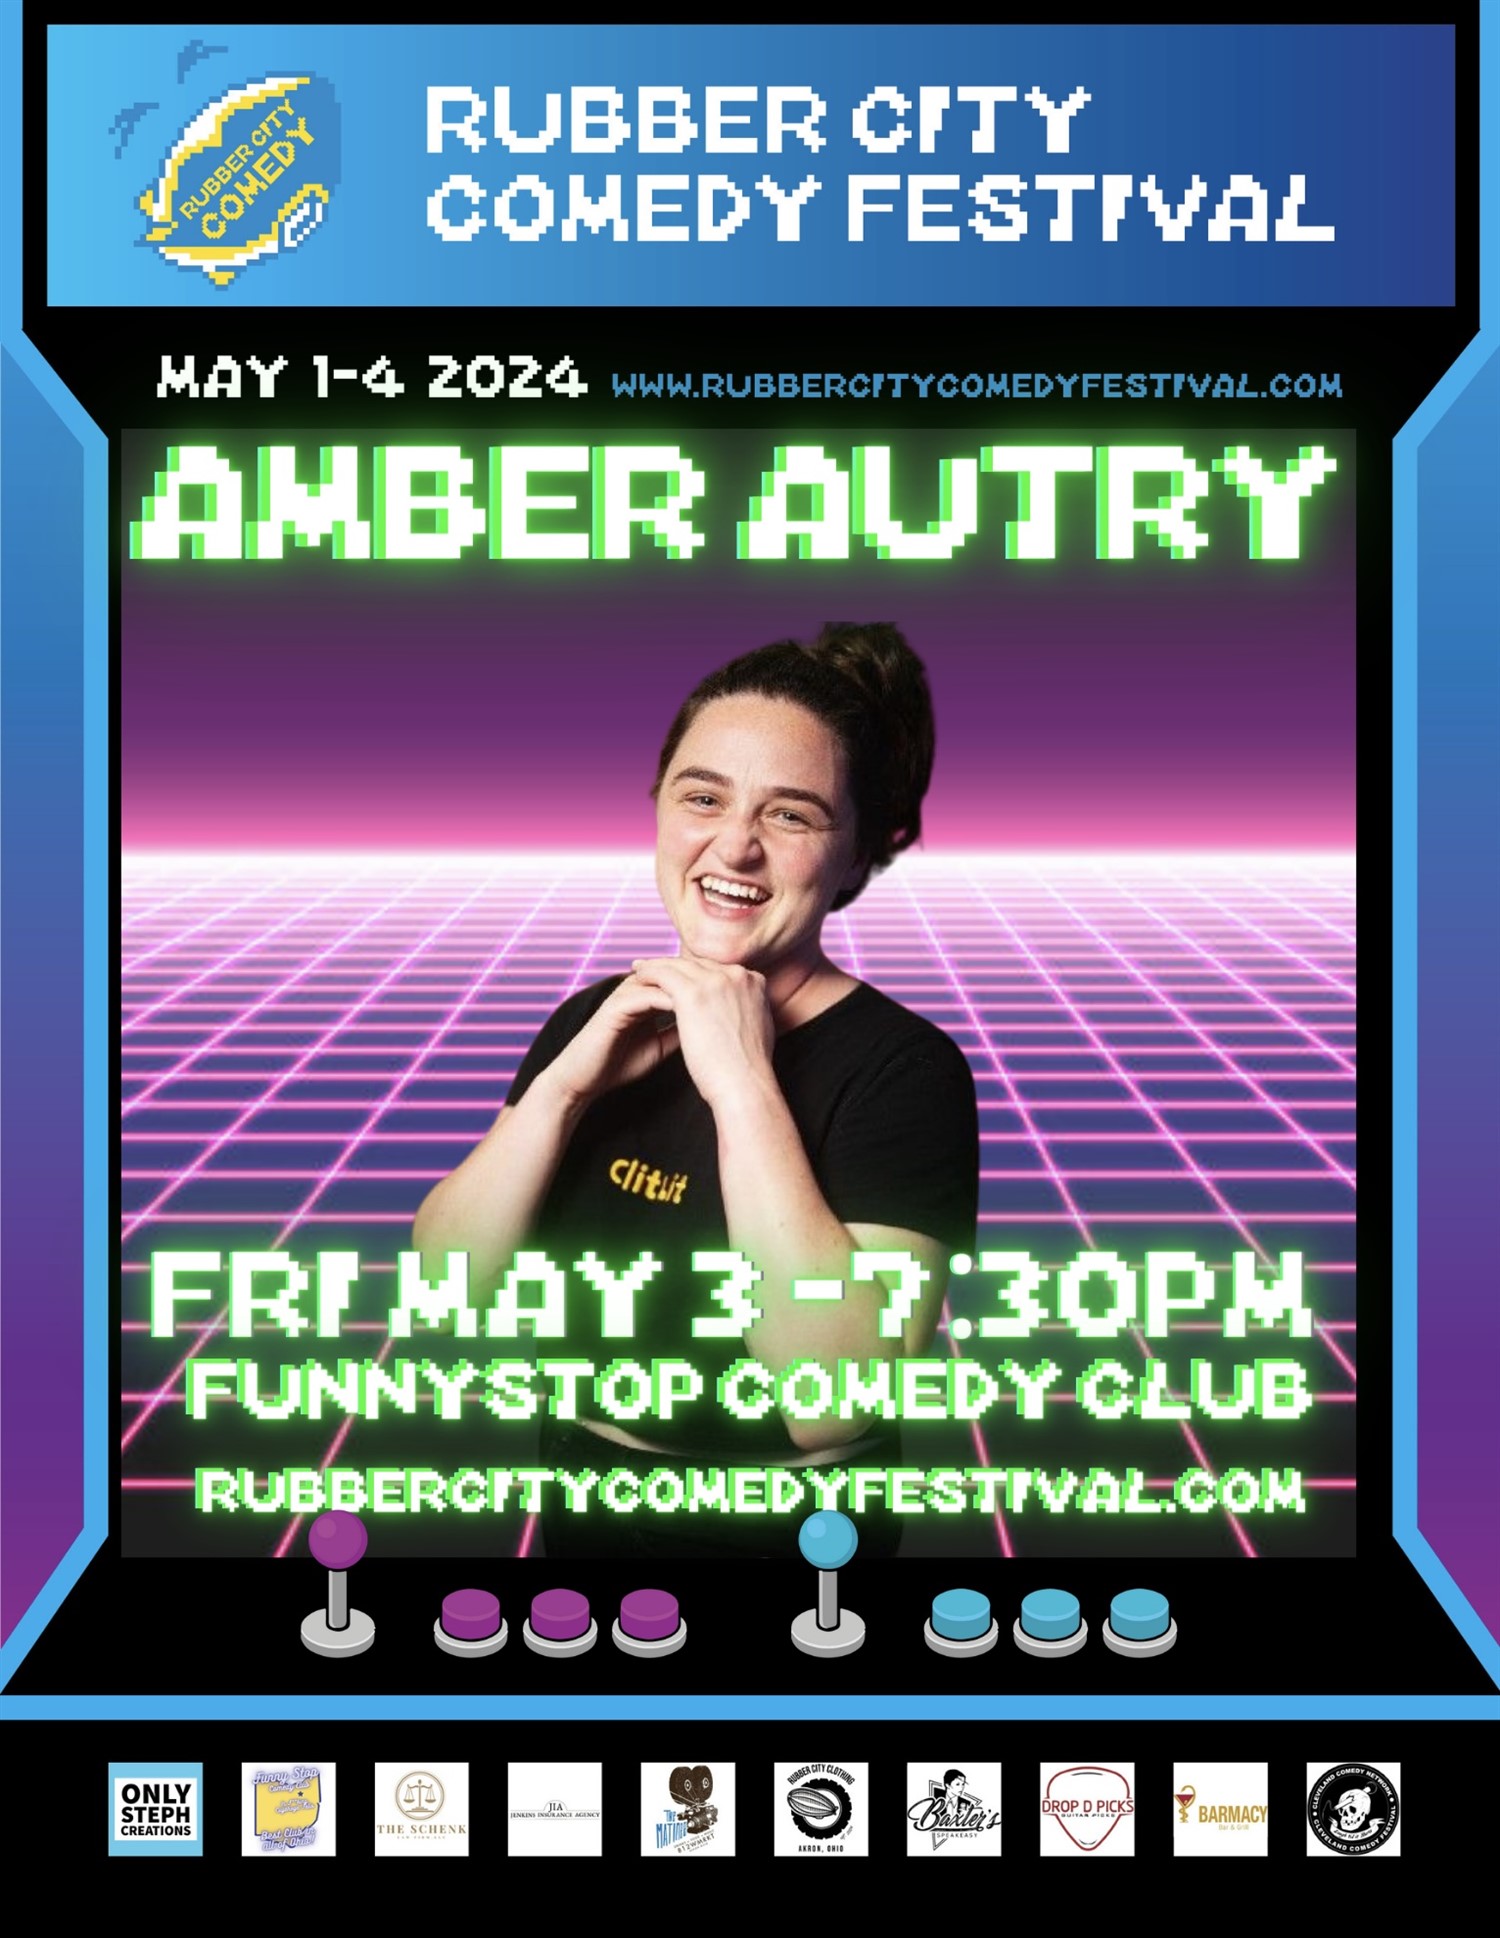 Amber Autry | 7:30 PM | Rubber City Comedy Festival Funny Stop Comedy Club on May 03, 19:30@Funny Stop Comedy Club - Buy tickets and Get information on Funny Stop funnystop.online